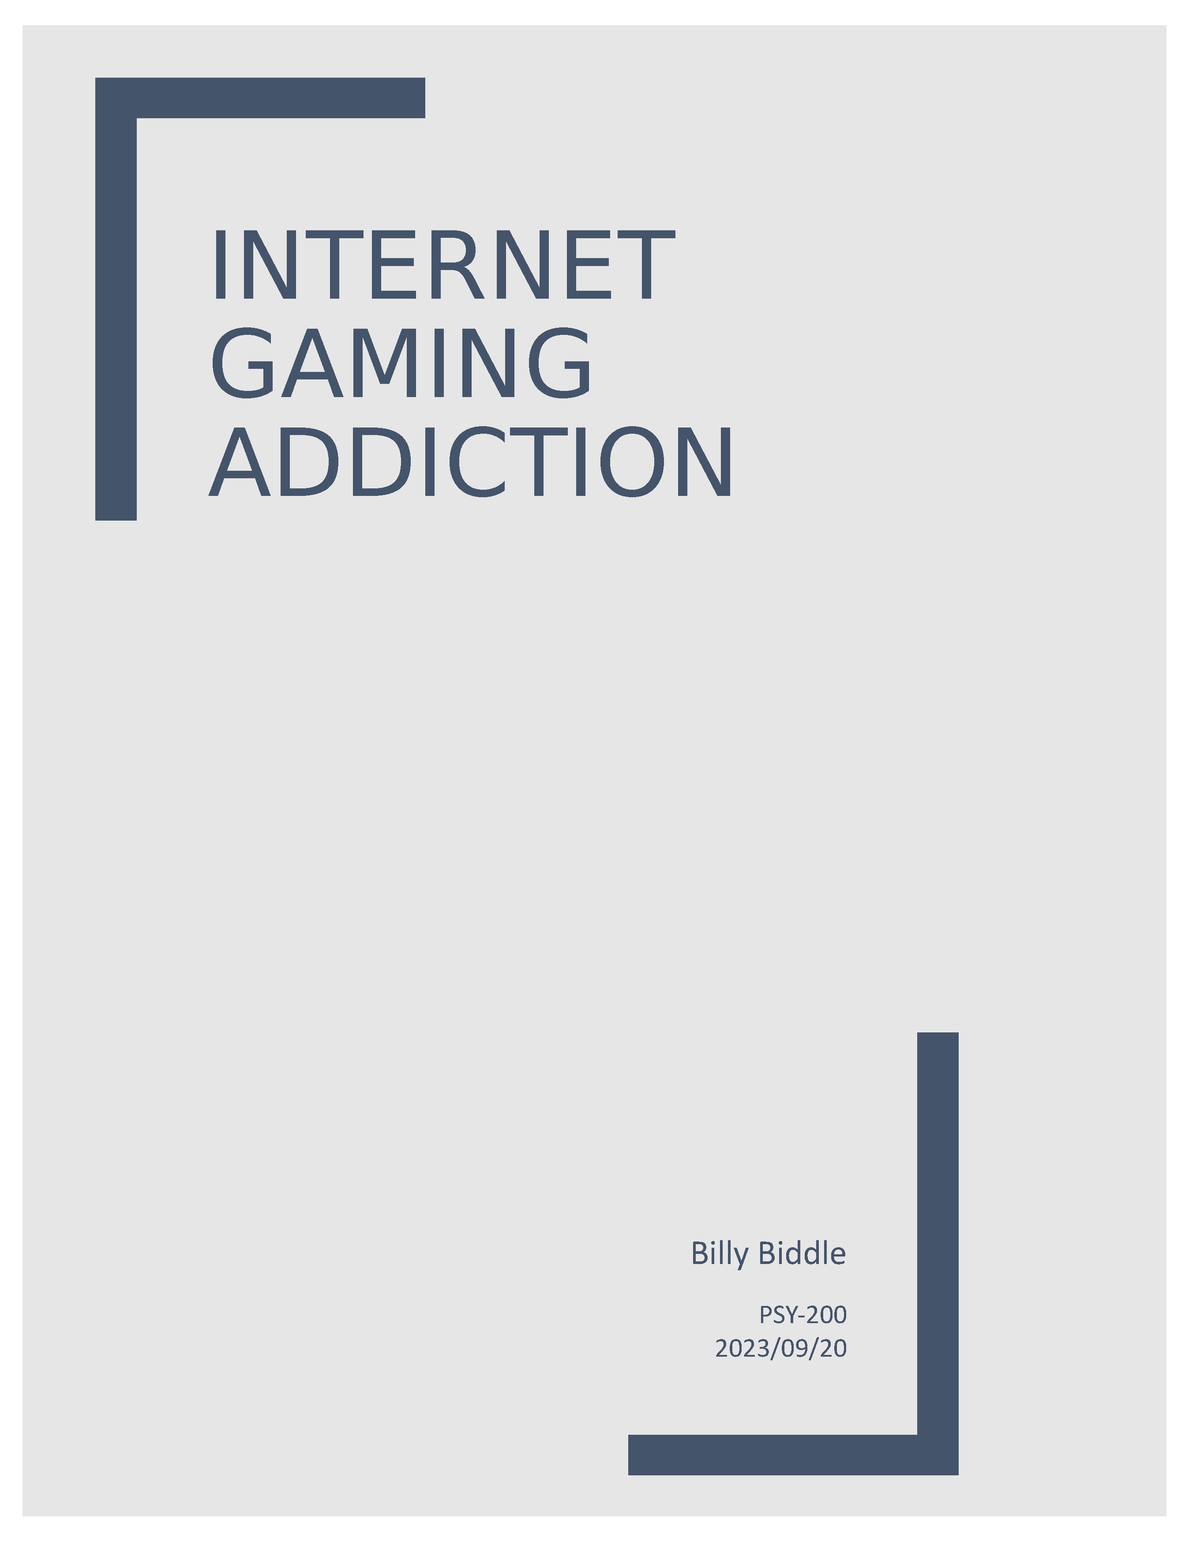 a case study of internet game addiction